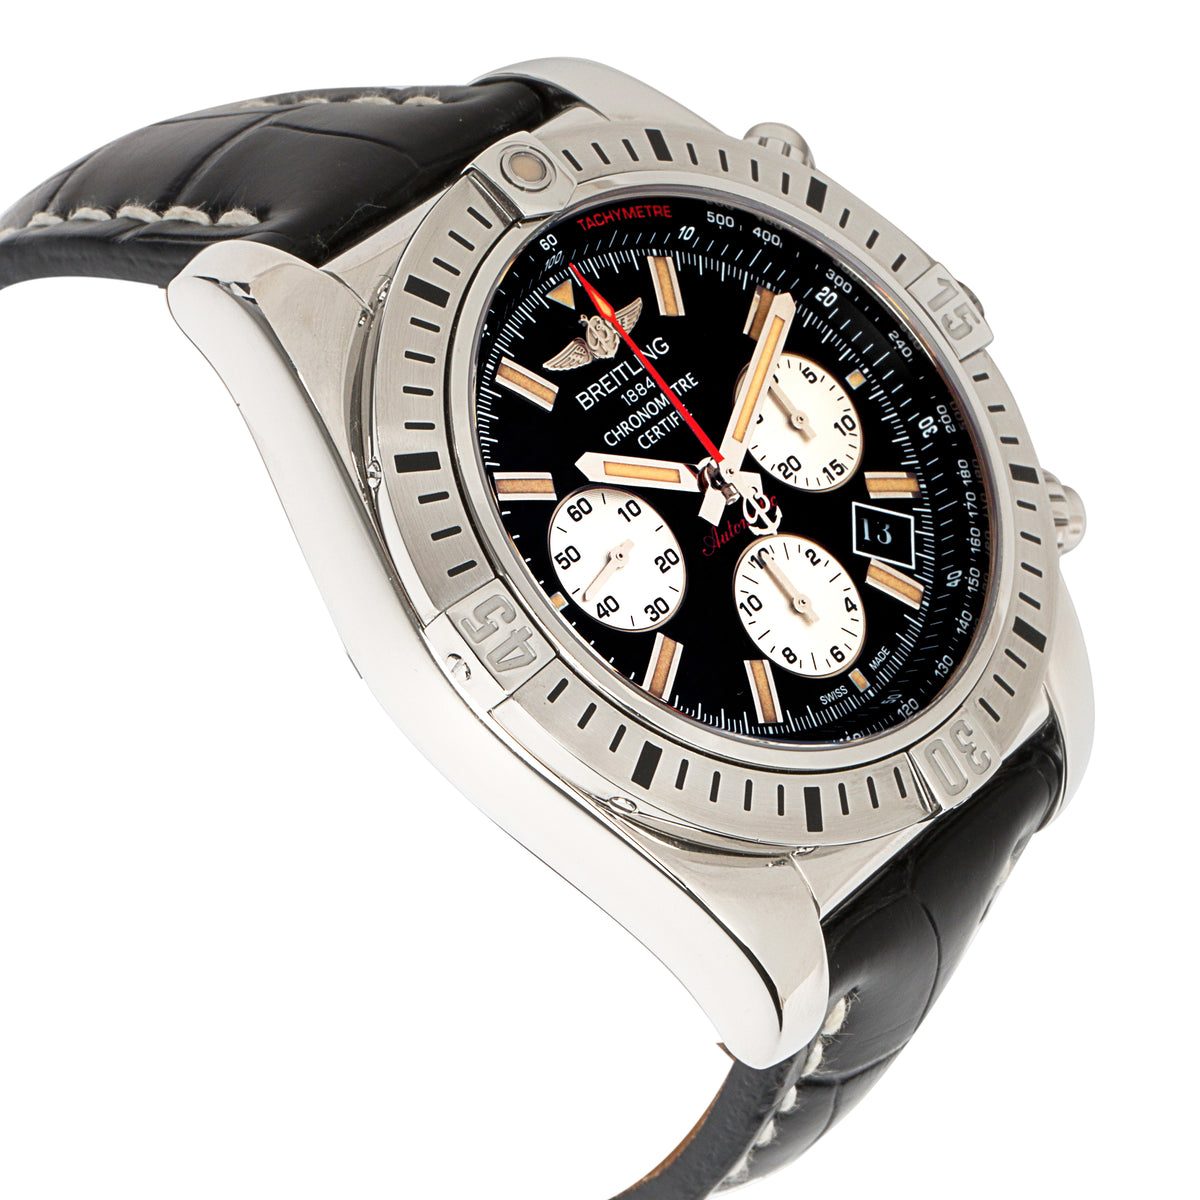 Breitling Chronomat 44 Airbourne AB0115 Men's Watch in  Stainless Steel